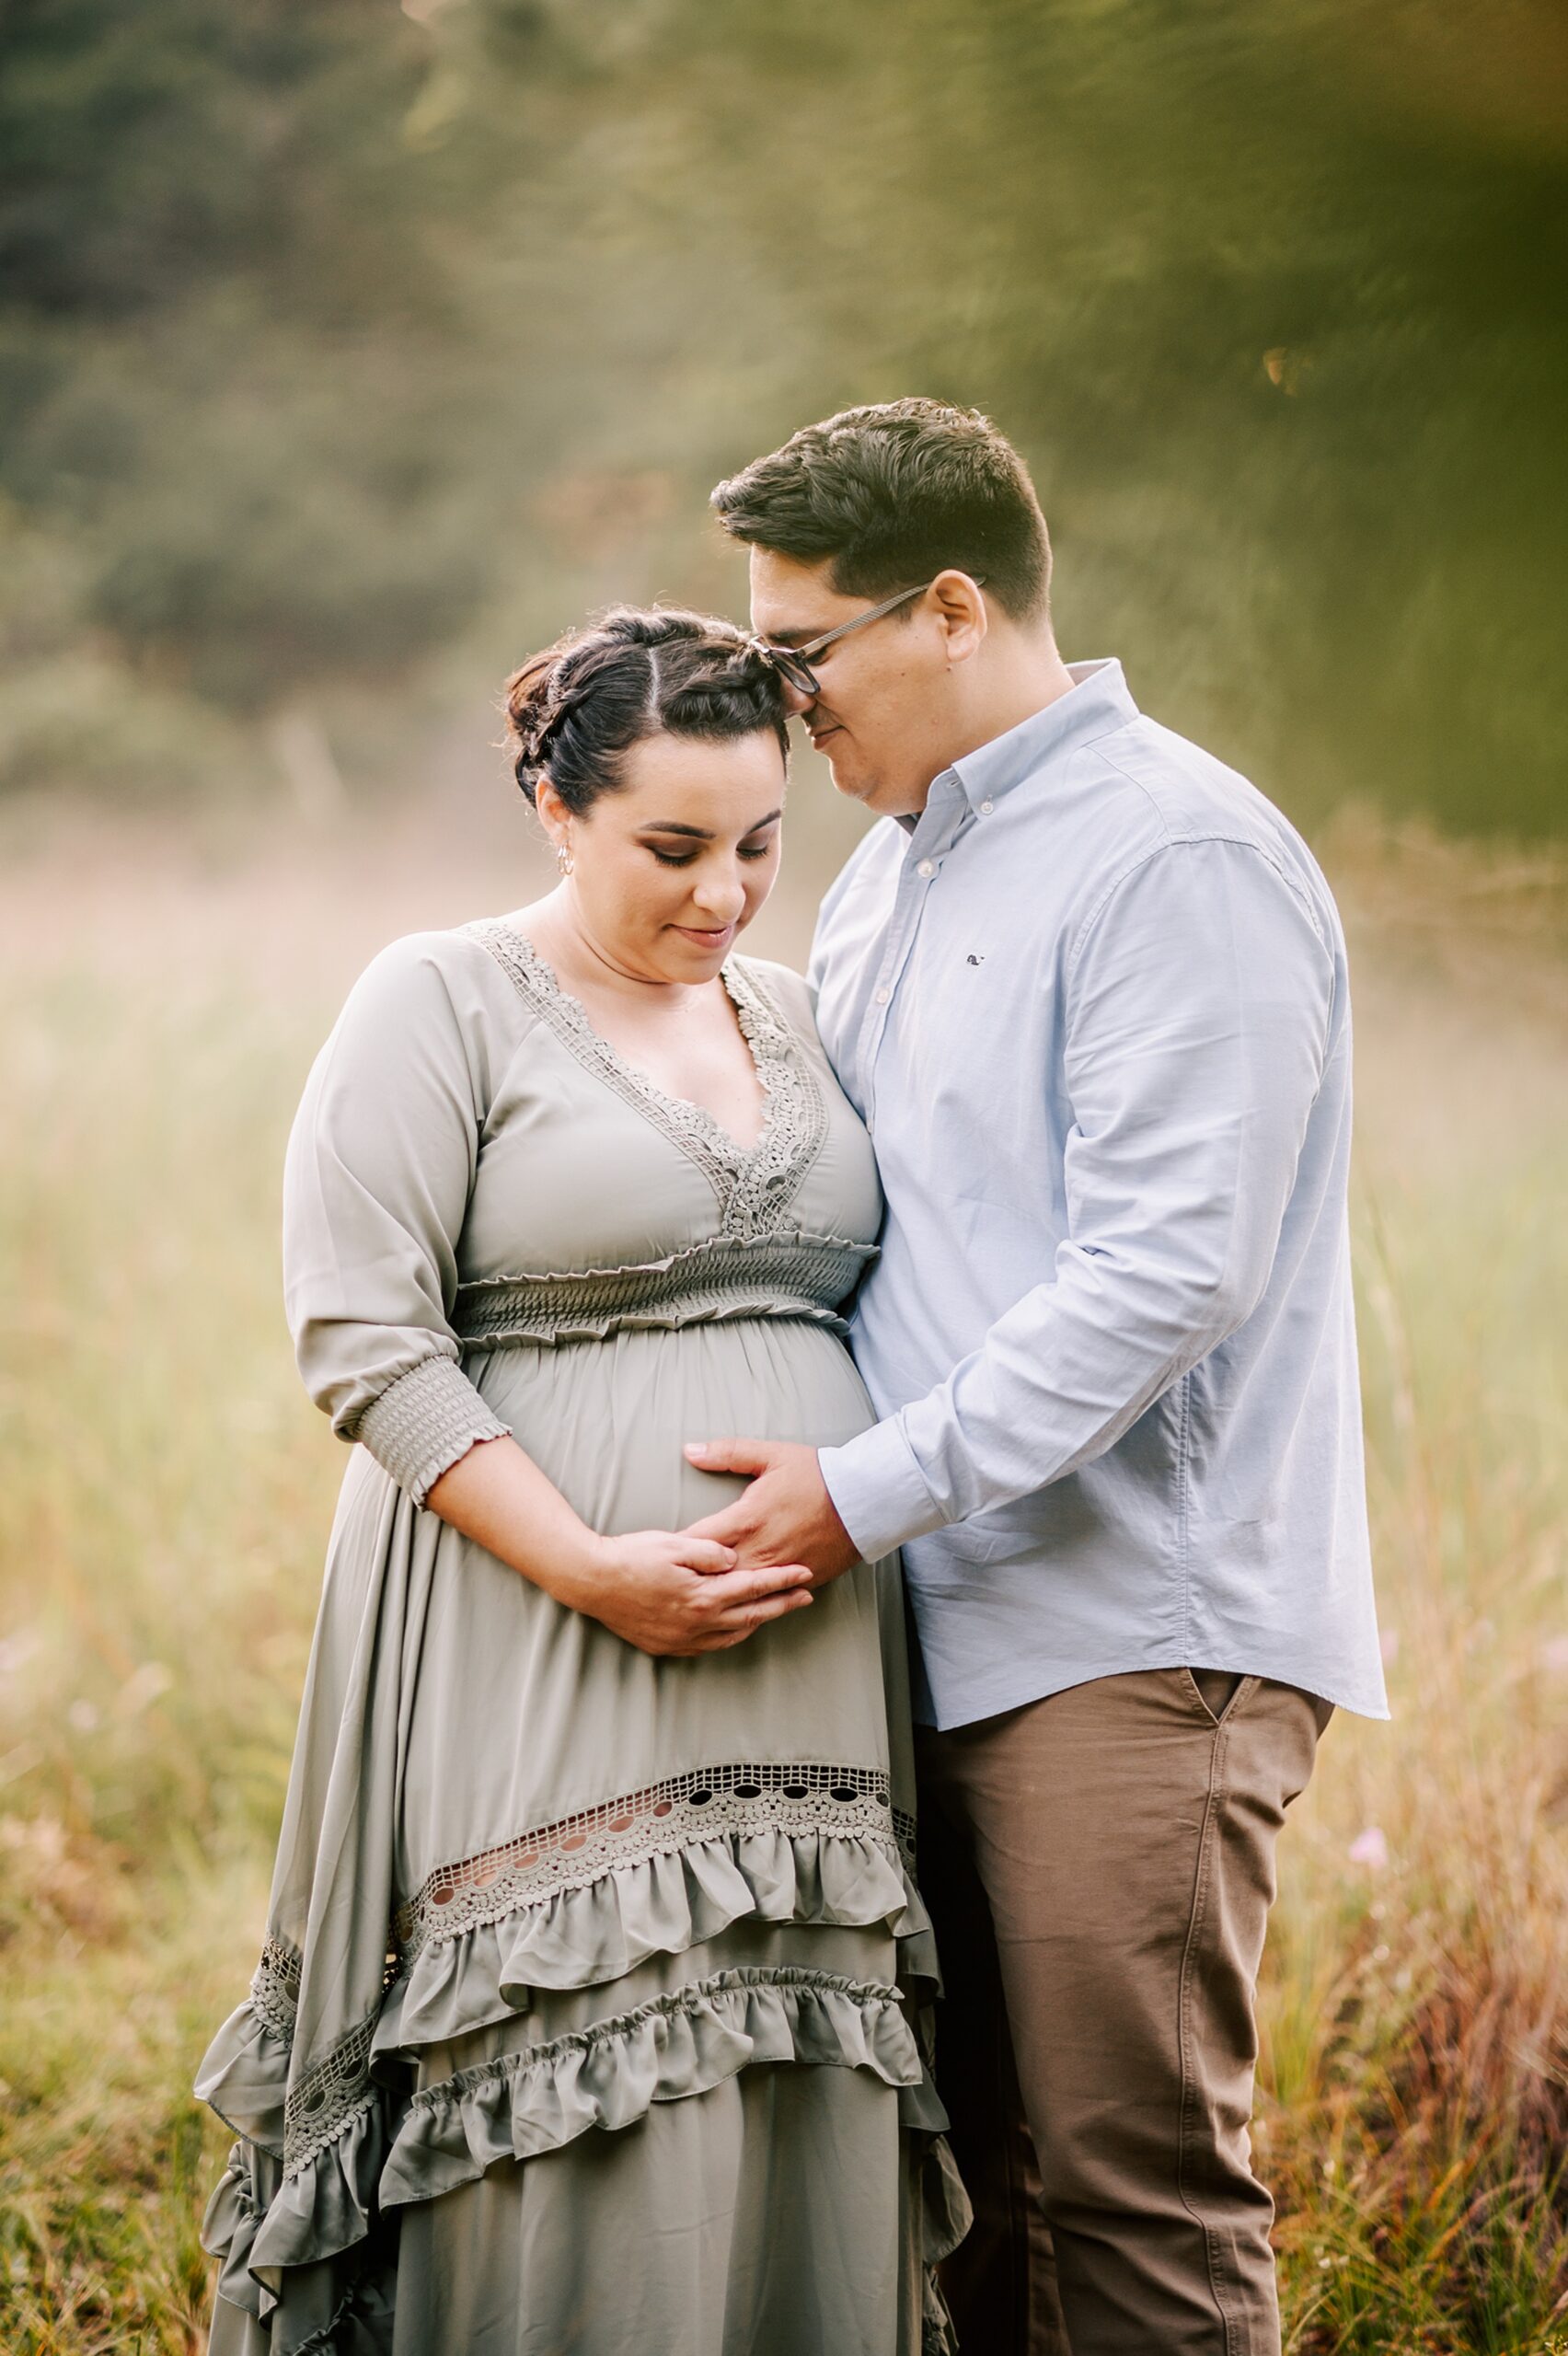 A mother to be in a green maternity dress stands close with her husband in a grassy green field at sunset holding the bump